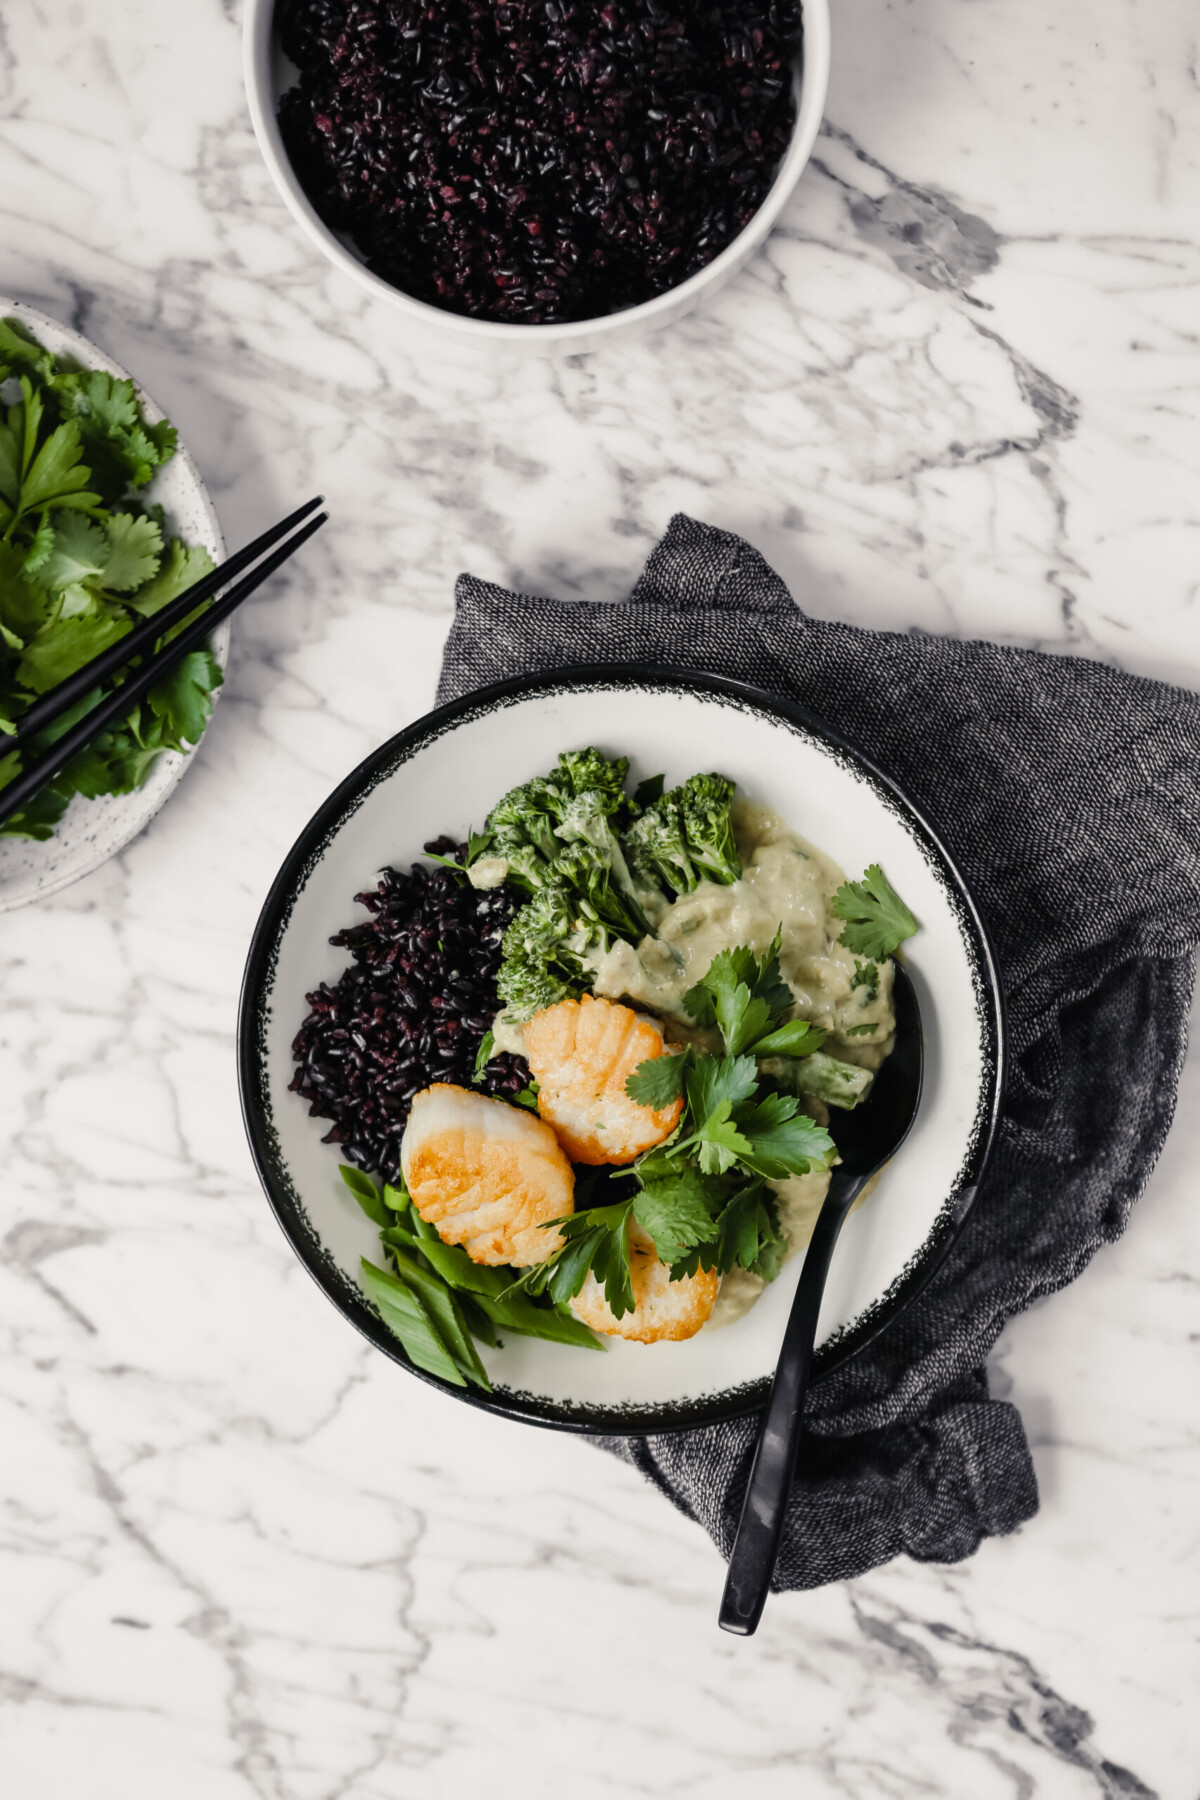 Photograph of a bowl filled with green coconut curry, black rice, broccolini and golden scallops set on a marble table with a gray napkin.